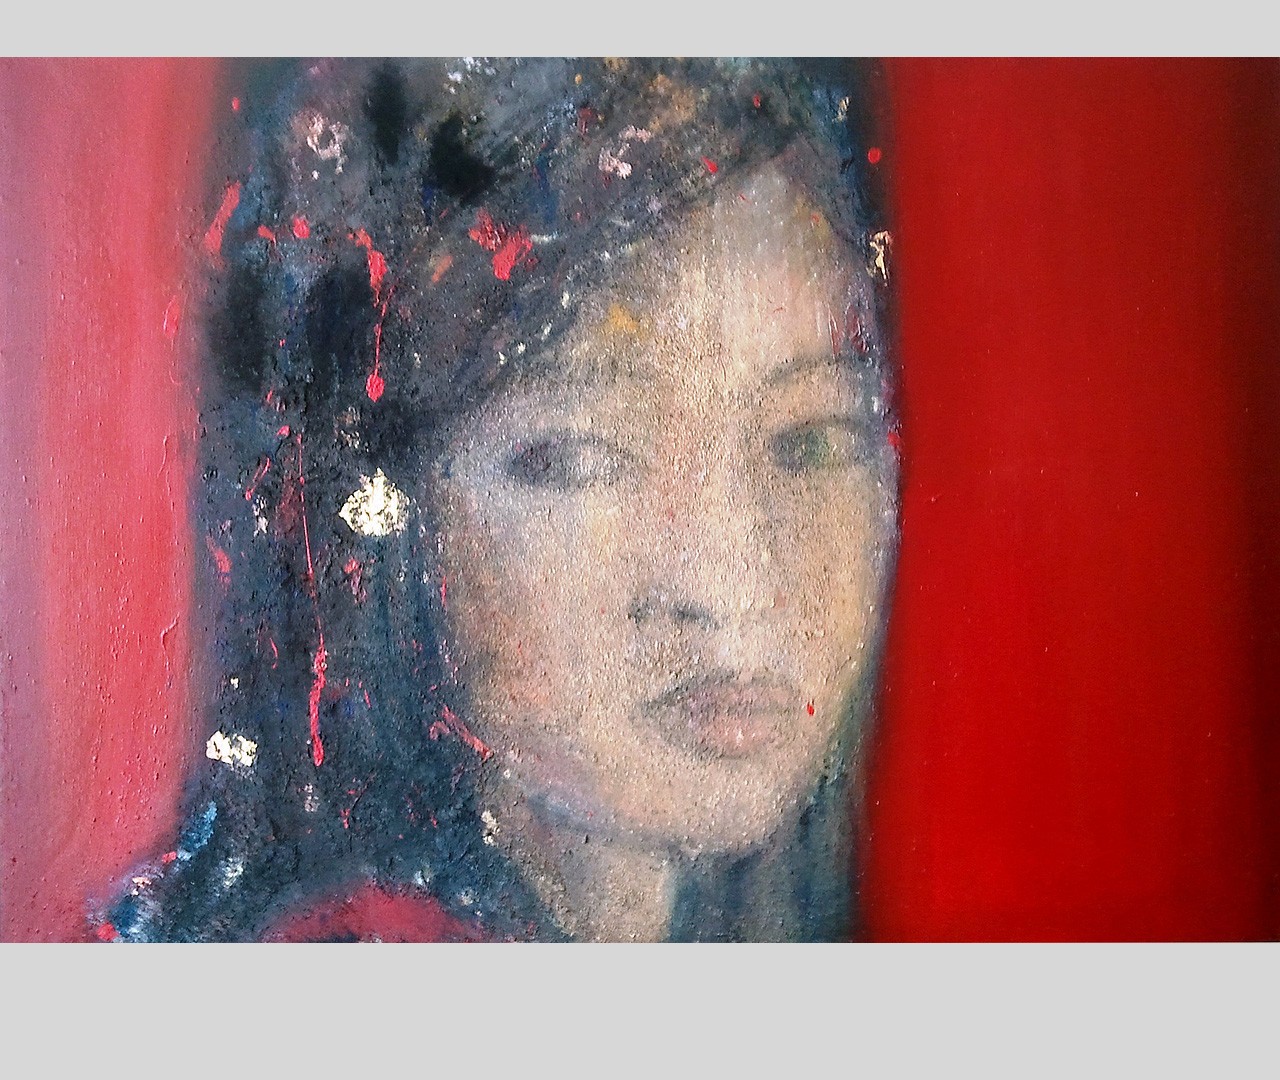 01oriental head IV, oil, pigments and gold plates over canvas, 170x120, 6000 eurs. 2012